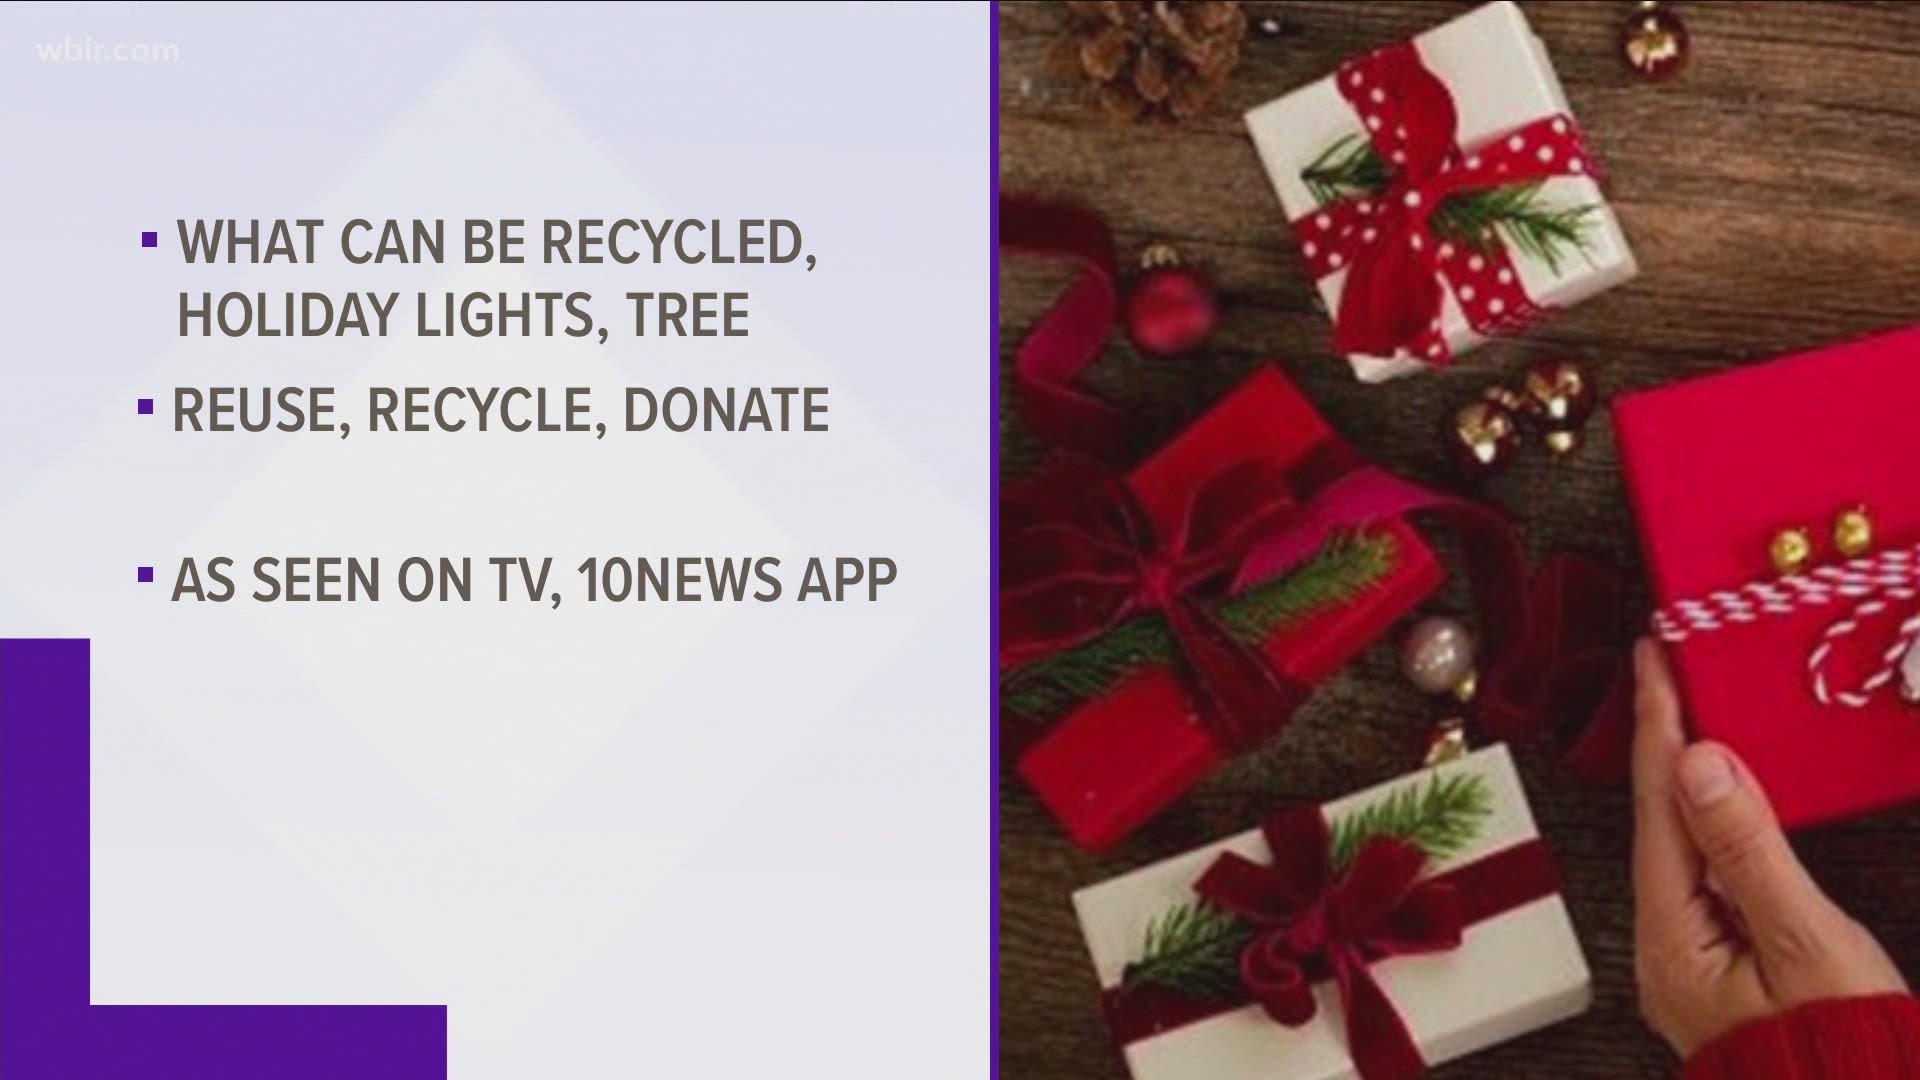 Here's what you can, and cannot, recycle from Christmas